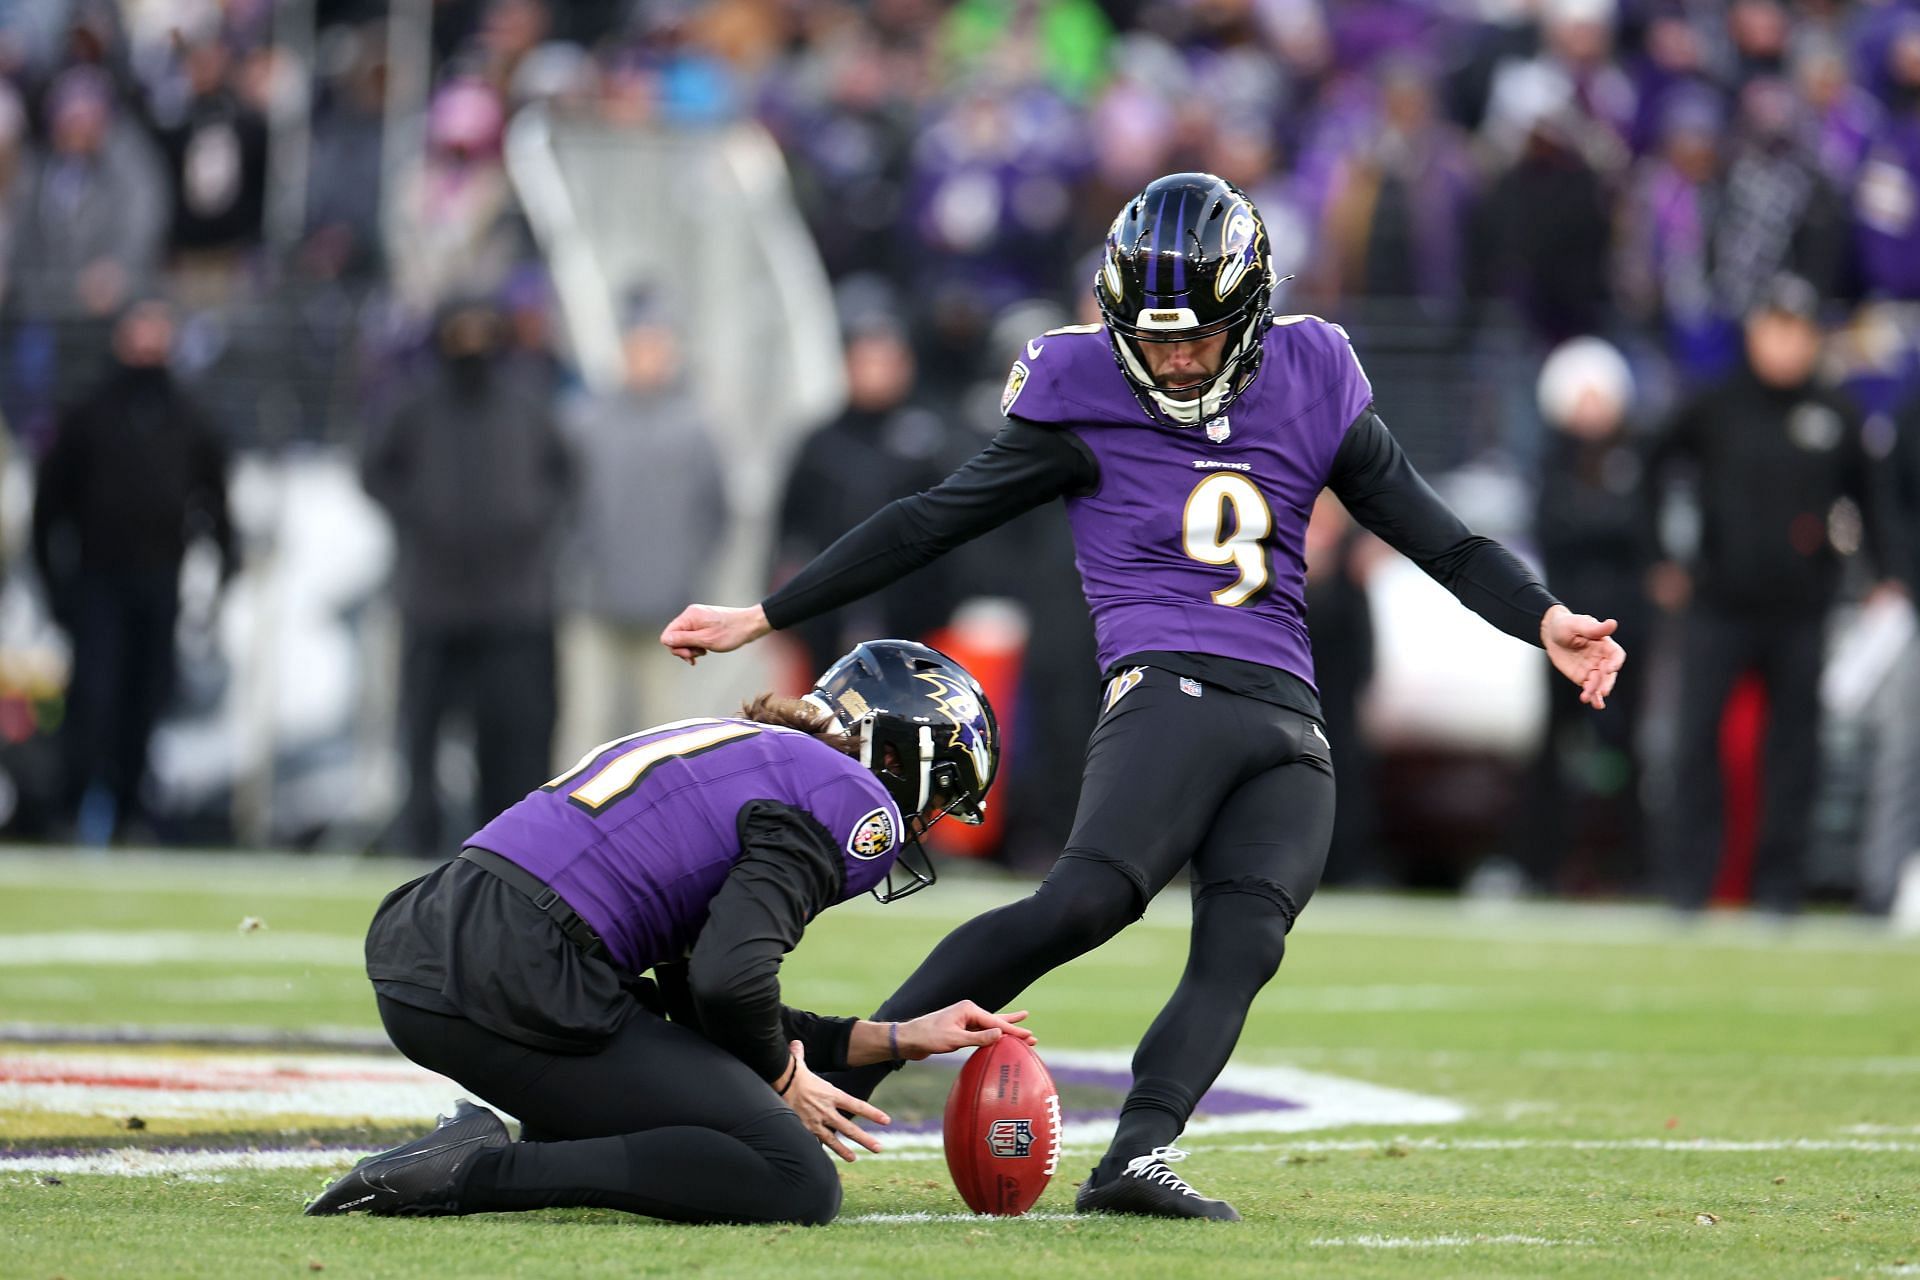 Is Justin Tucker the most accurate kicker?